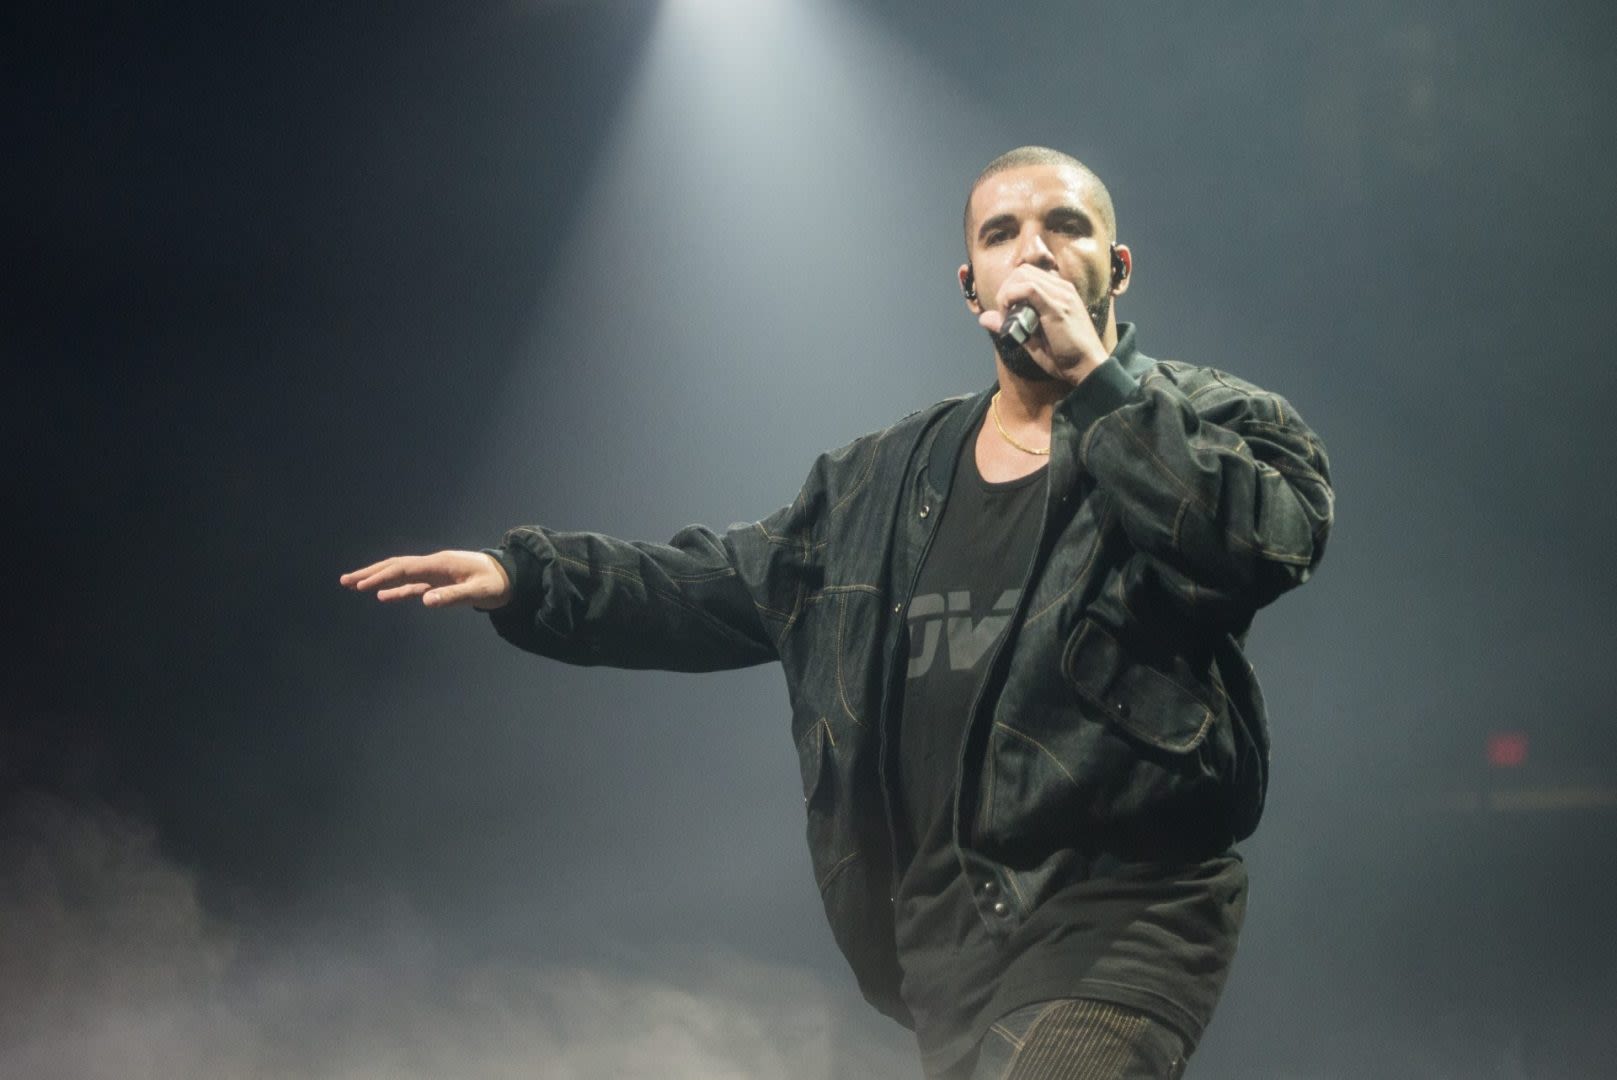 The fallout continues from Drake's feud with Kendrick Lamar